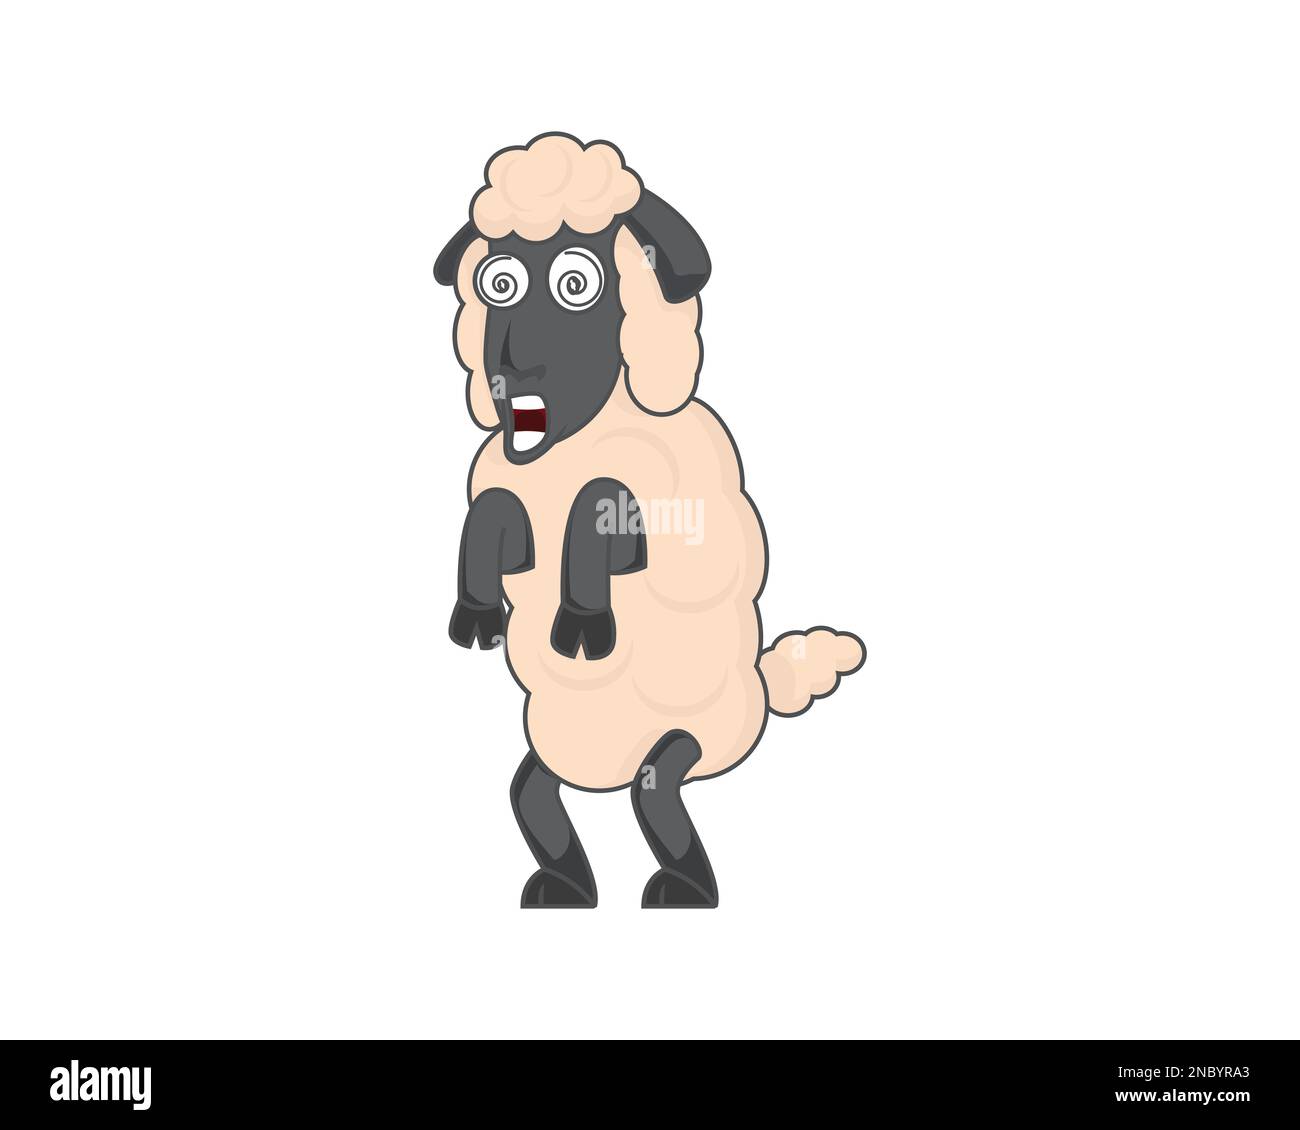 Dizzy Sheep with Standing Gesture Illustration Stock Vector